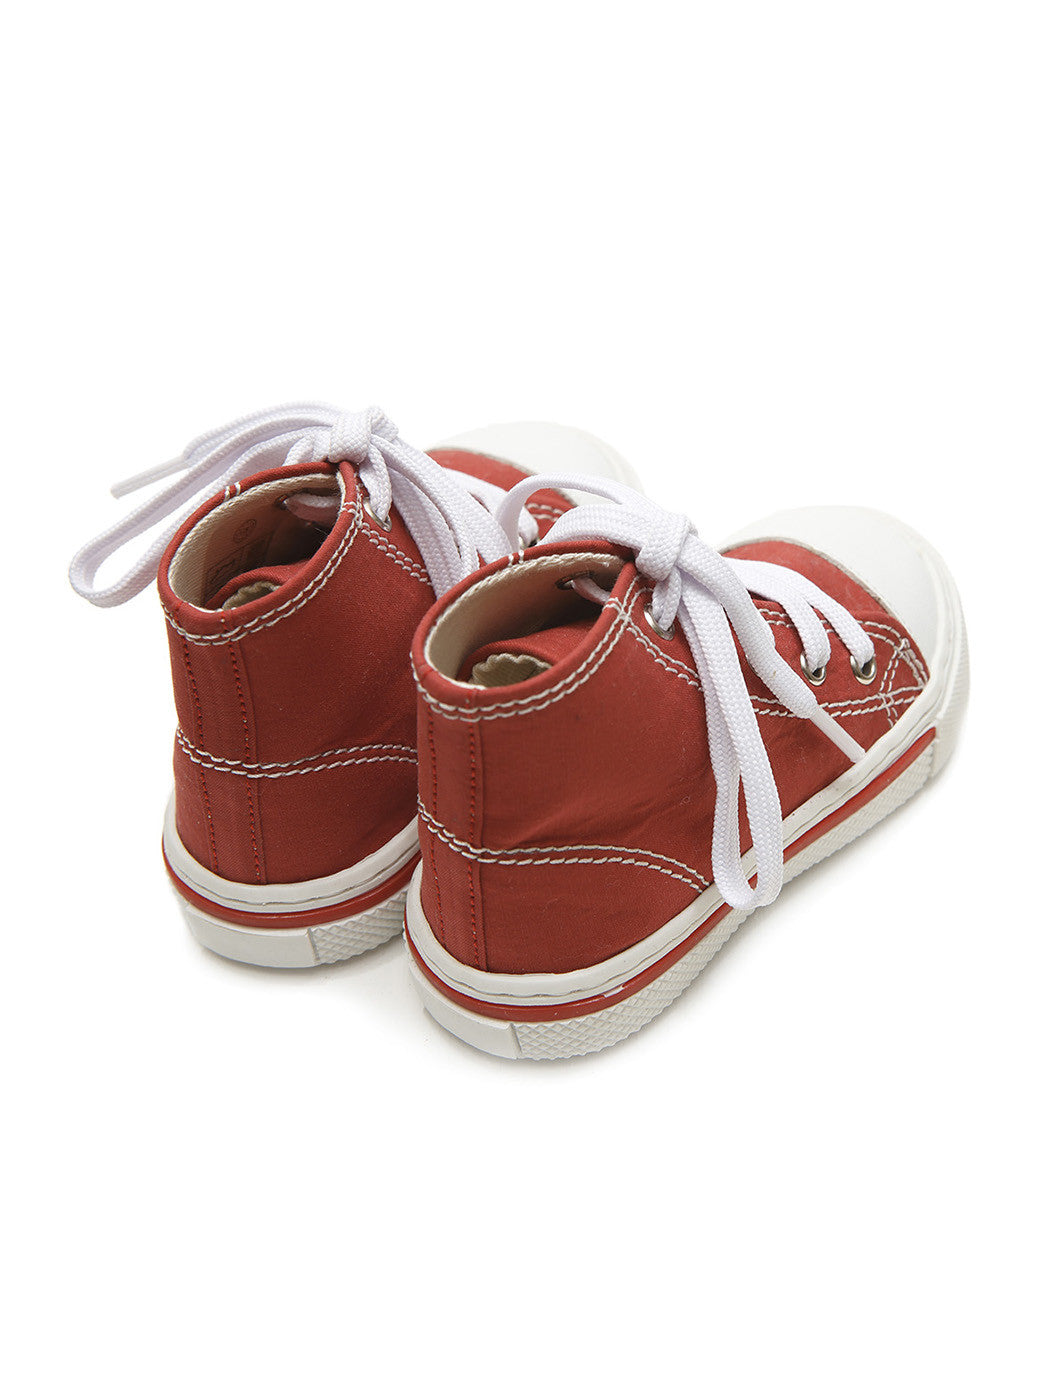 Baby bootie shoe for boy-GAS Red